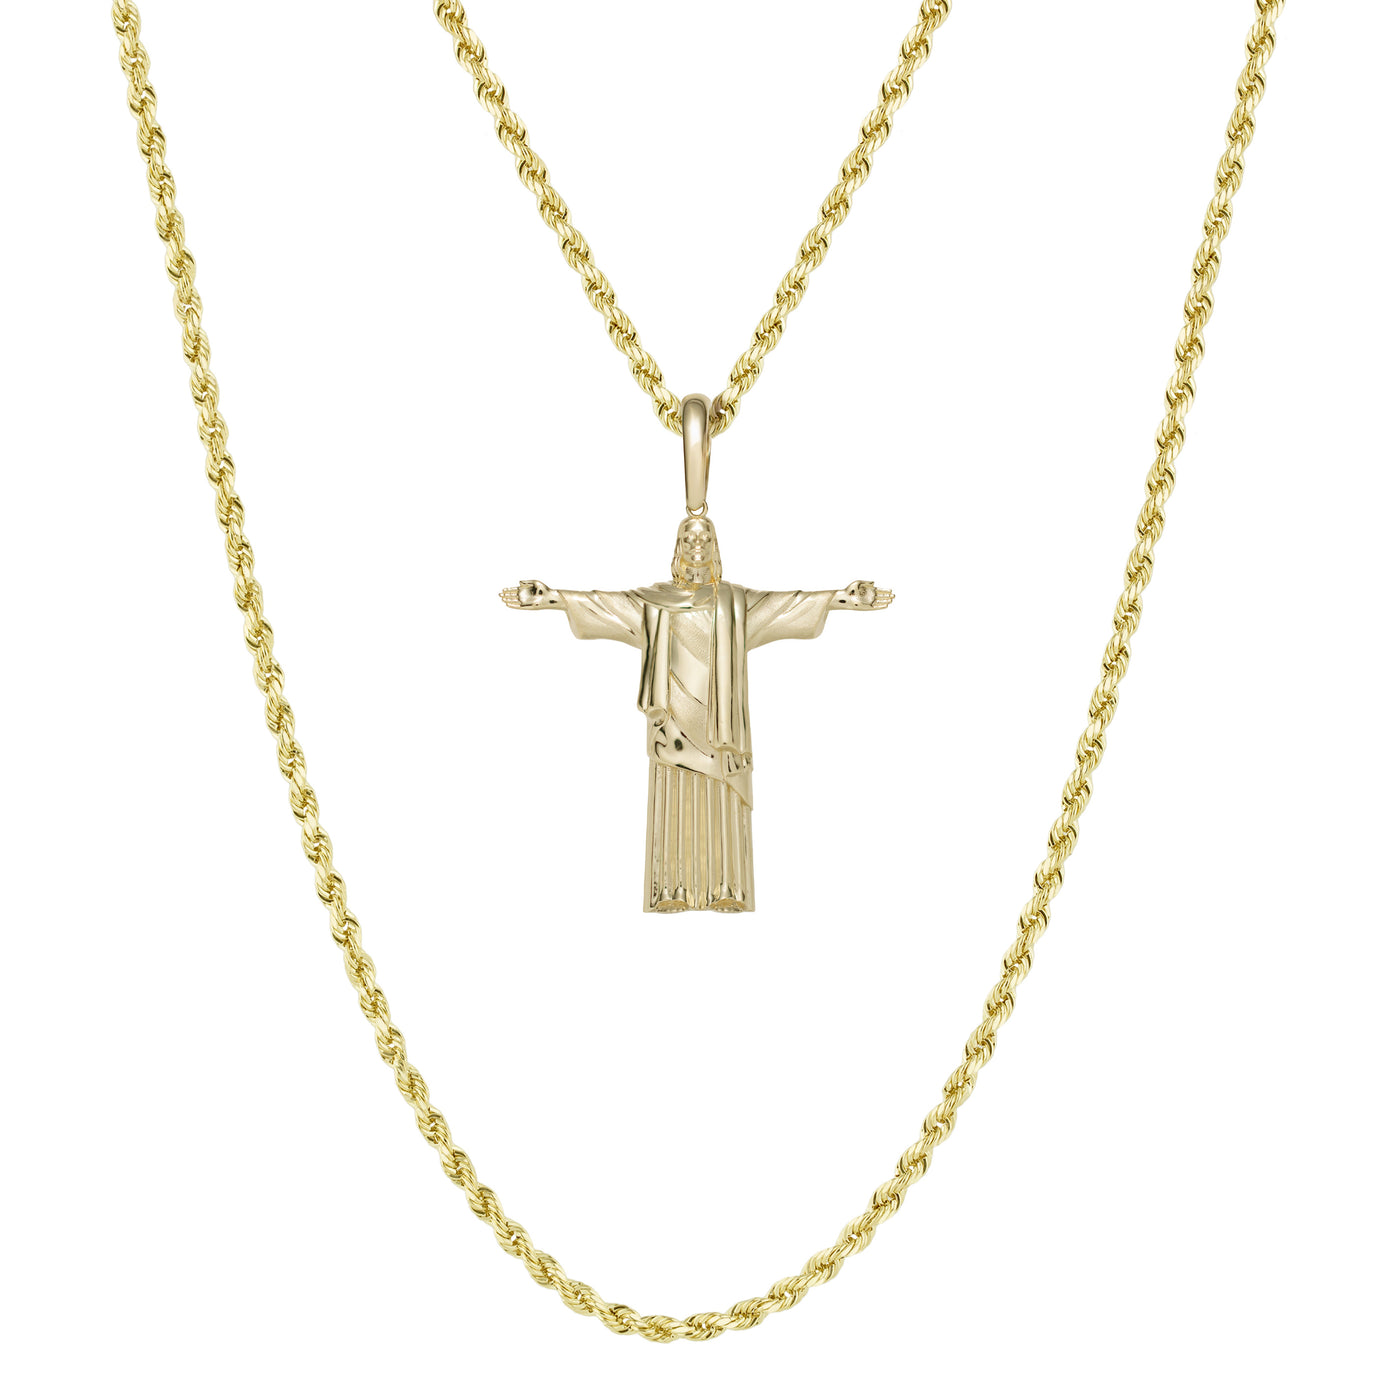 Jesus Christ Christ the Redeemer Pendant & Chain Necklace Set 10K Yellow Gold